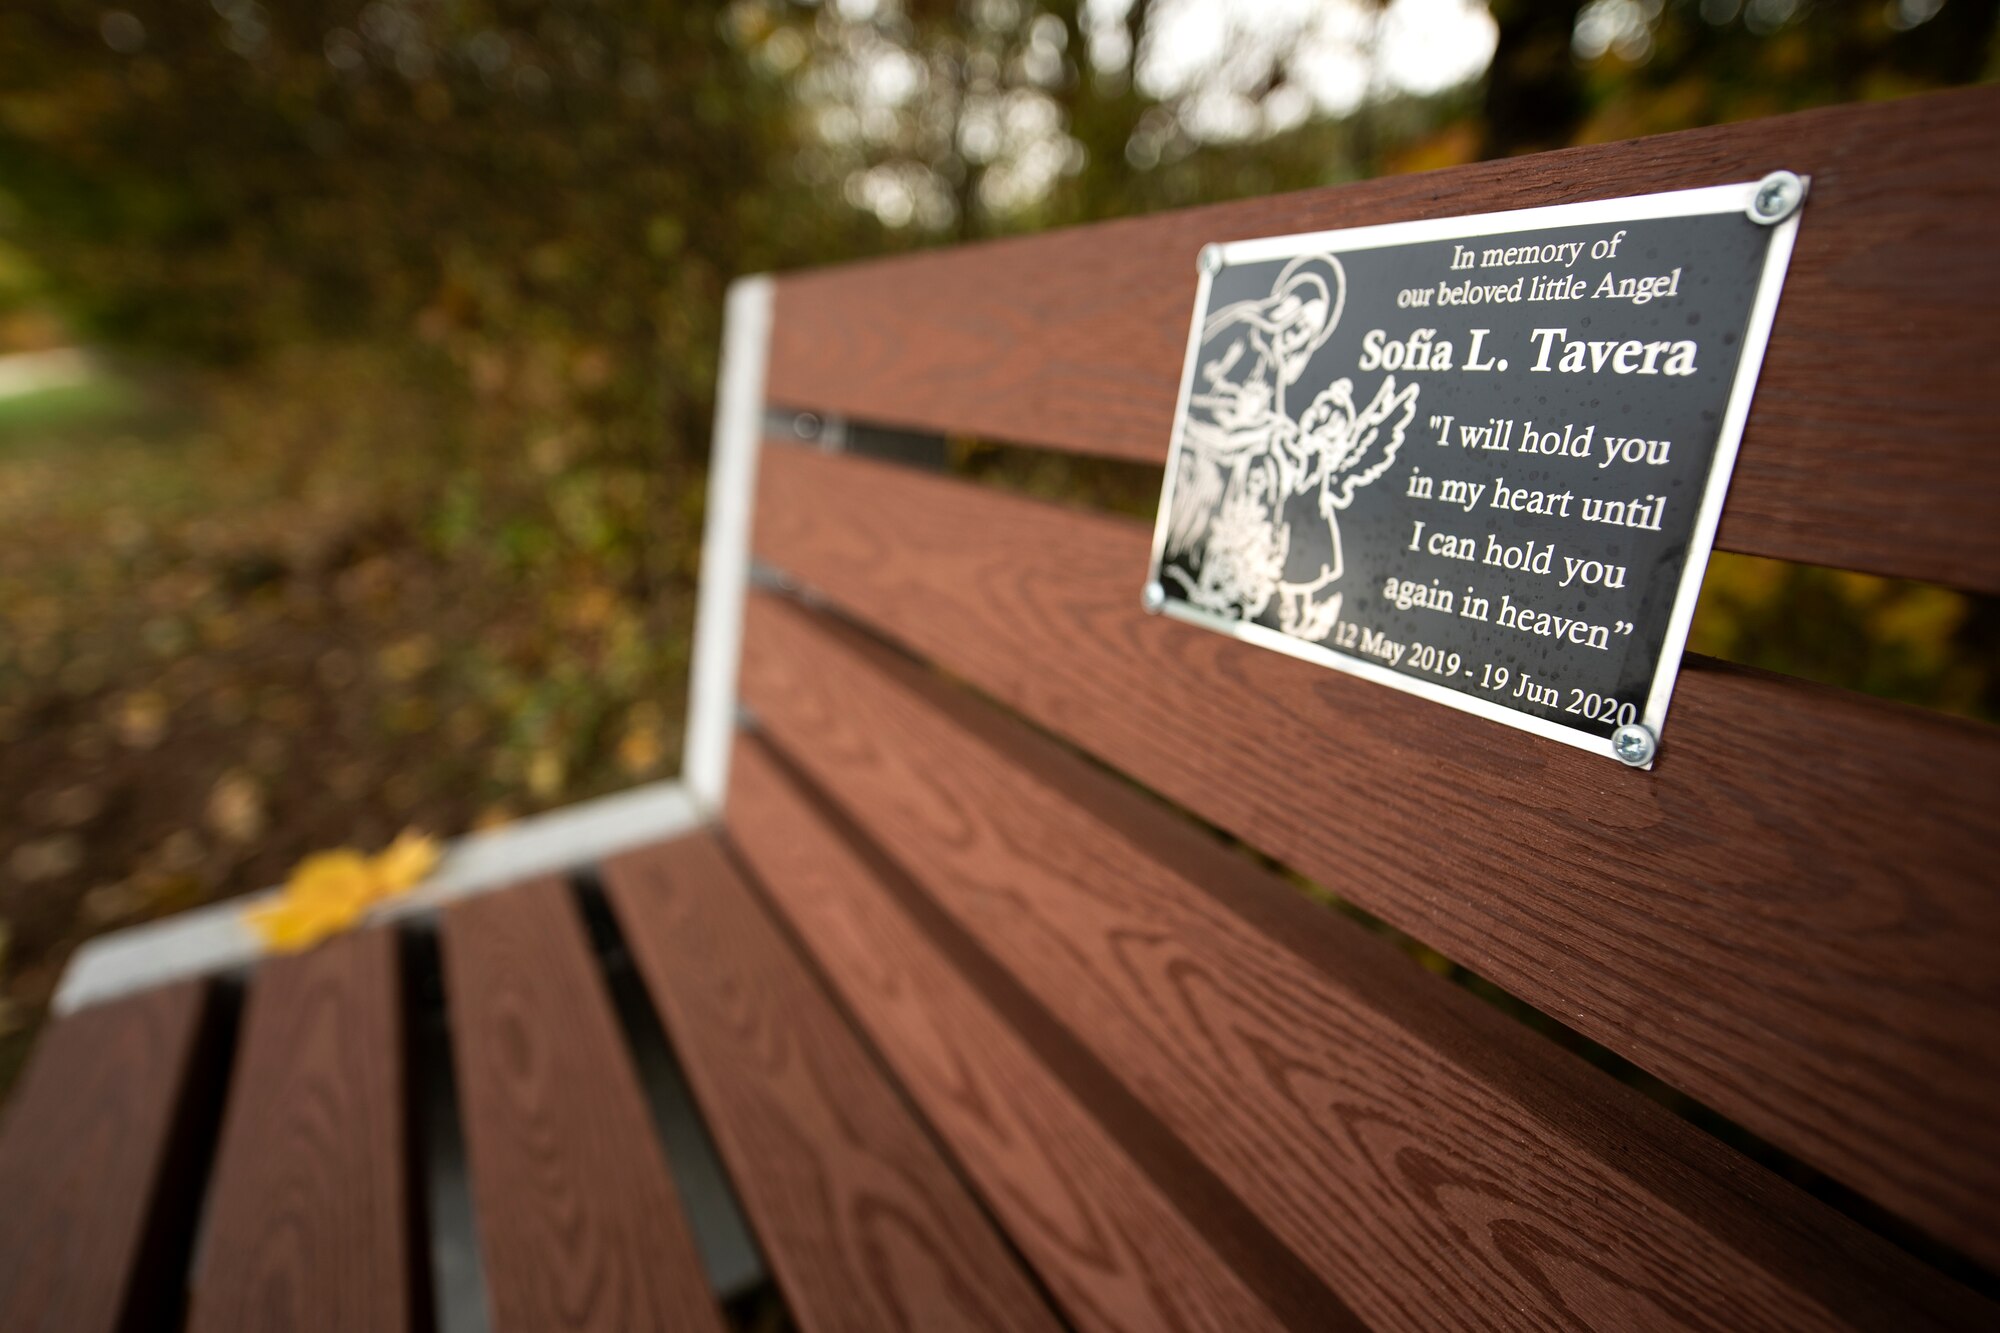 A memorial bench dedicated to Sofia Tavera, a 1-year-old girl who passed away in June 2020, is placed overlooking a field in Binsfeld, Germany, Oct. 16, 2020. The Taveras coordinated with the 52nd Fighter Wing Community Relations office, who coordinated with the Binsfeld town council to approve having the bench installed in the town outside of Spangdahlem Air Base, Germany’s perimeter.(U.S. Air Force photo by Tech. Sgt. Maeson L. Elleman)